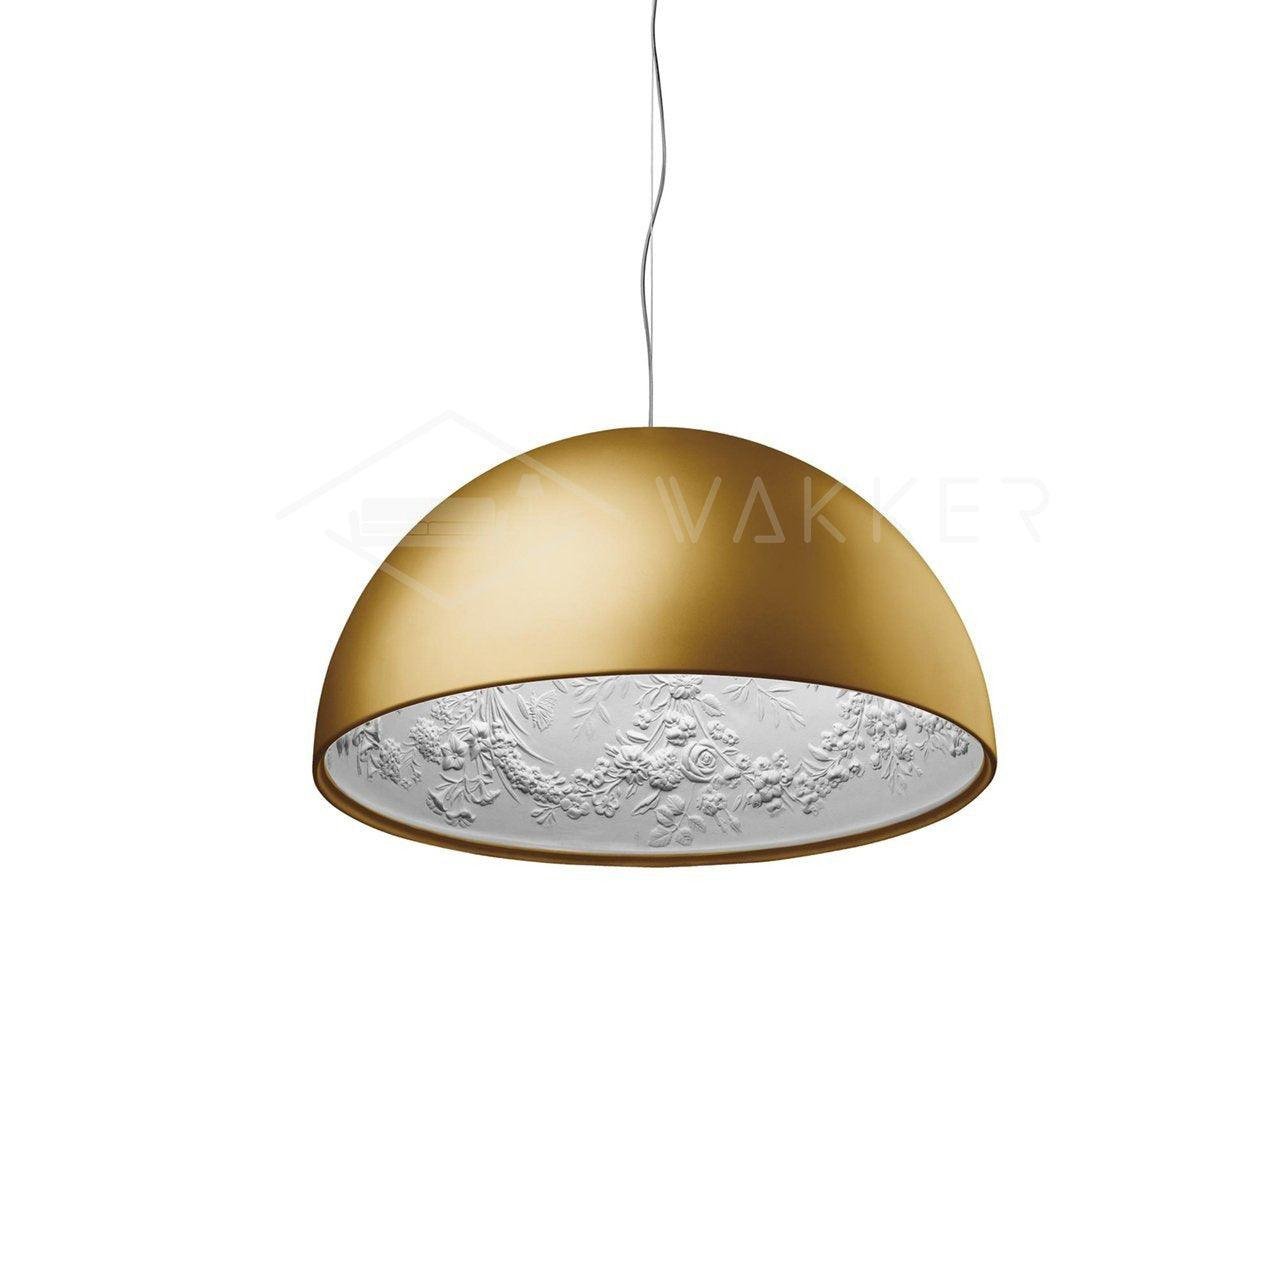 Gold Sky Garden Pendant Light with a diameter of 35.4 inches and a height of 17.7 inches (or 90cm x 45cm).